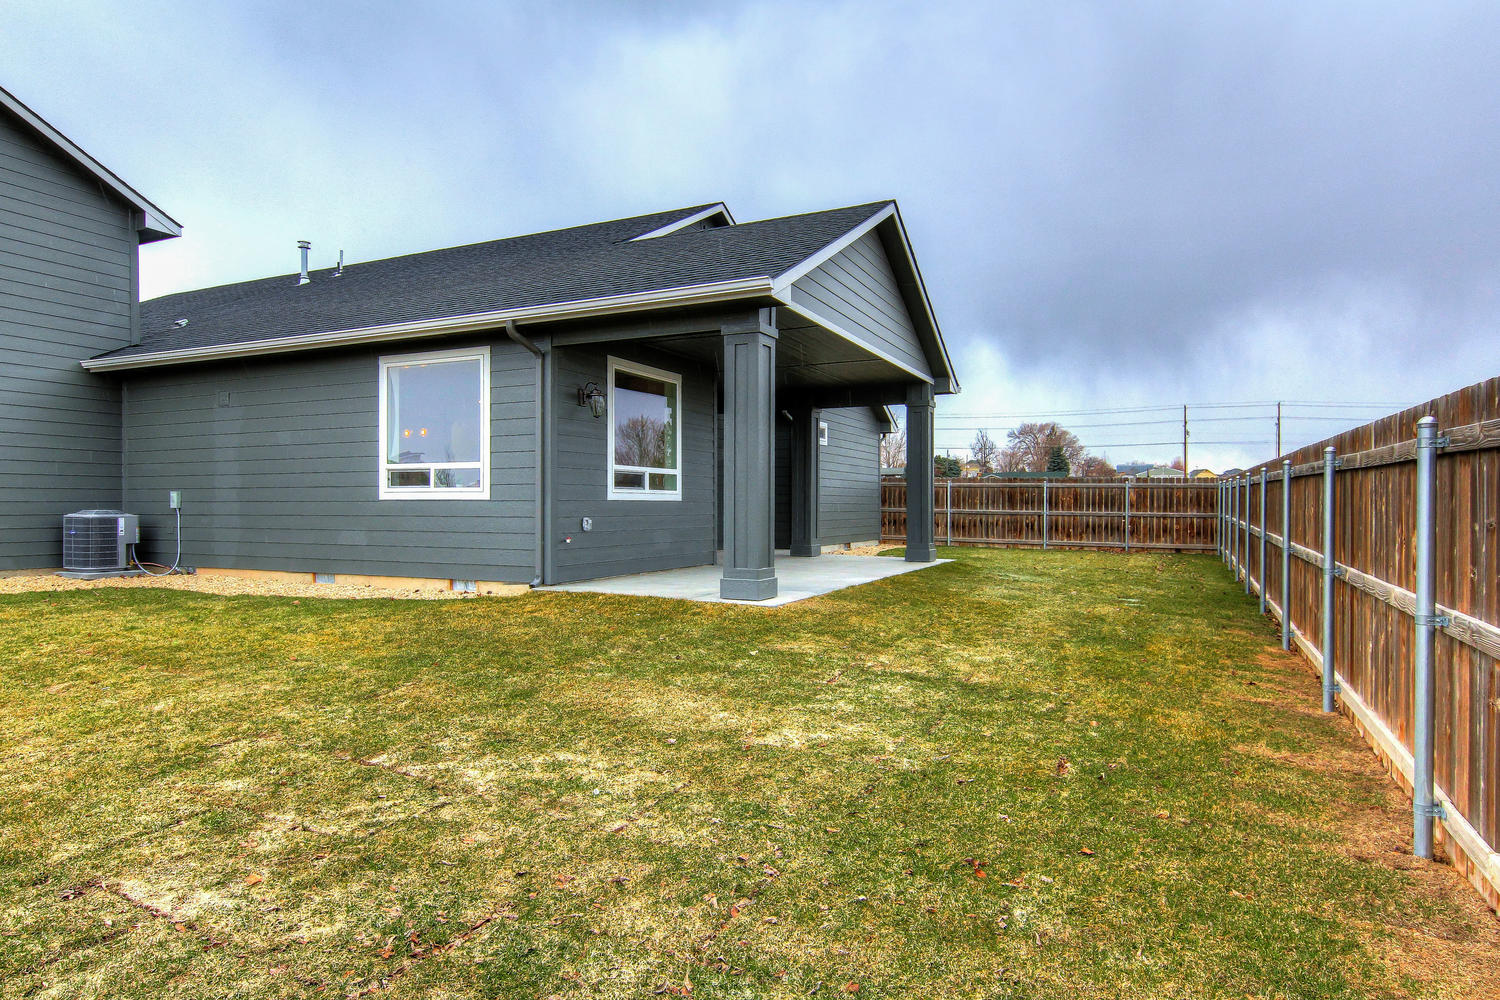 Rear Elevation 1203 S Spring Valley Dr Nampa-large-027-19-1203 S Spring Valley Dr Nampa-1500x1000-72dpi.jpg